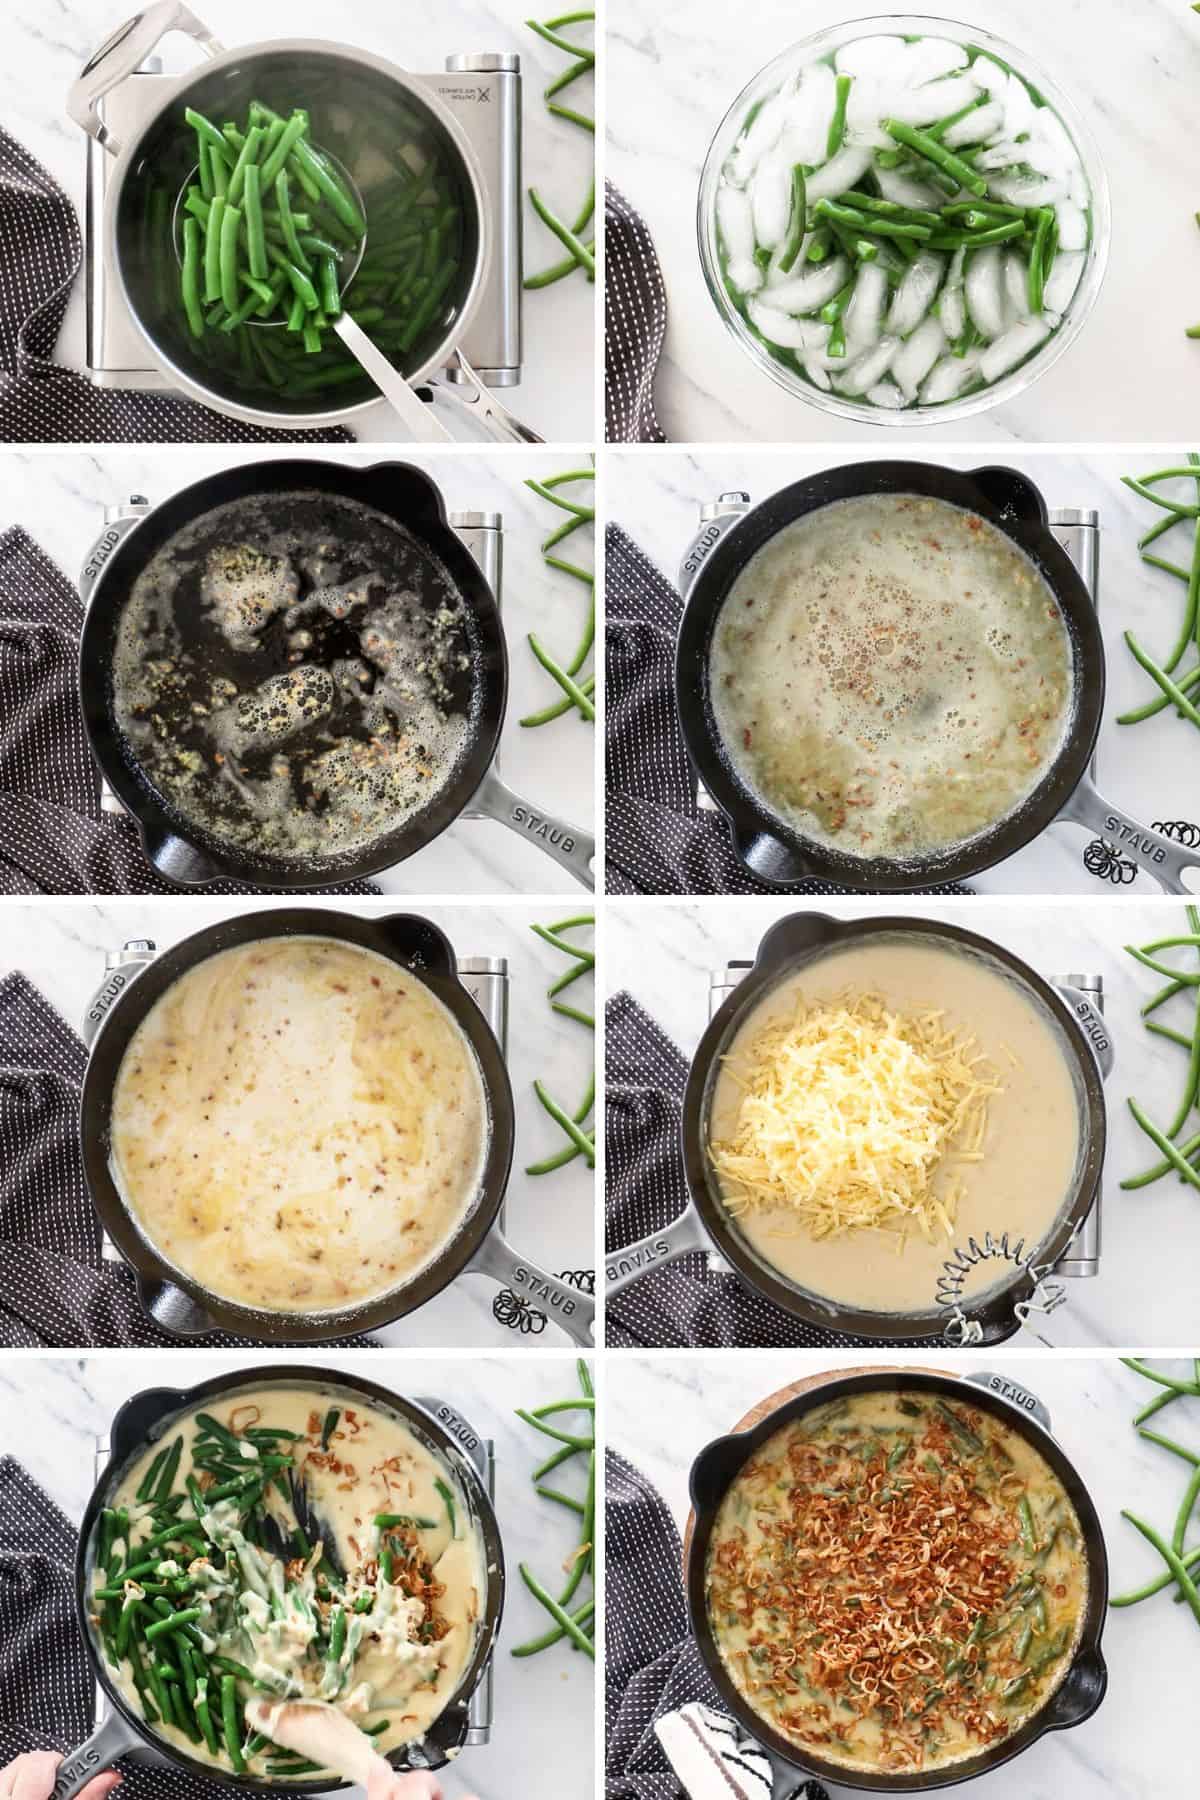 8 photos showing the process of making green bean casserole without mushroom soup.